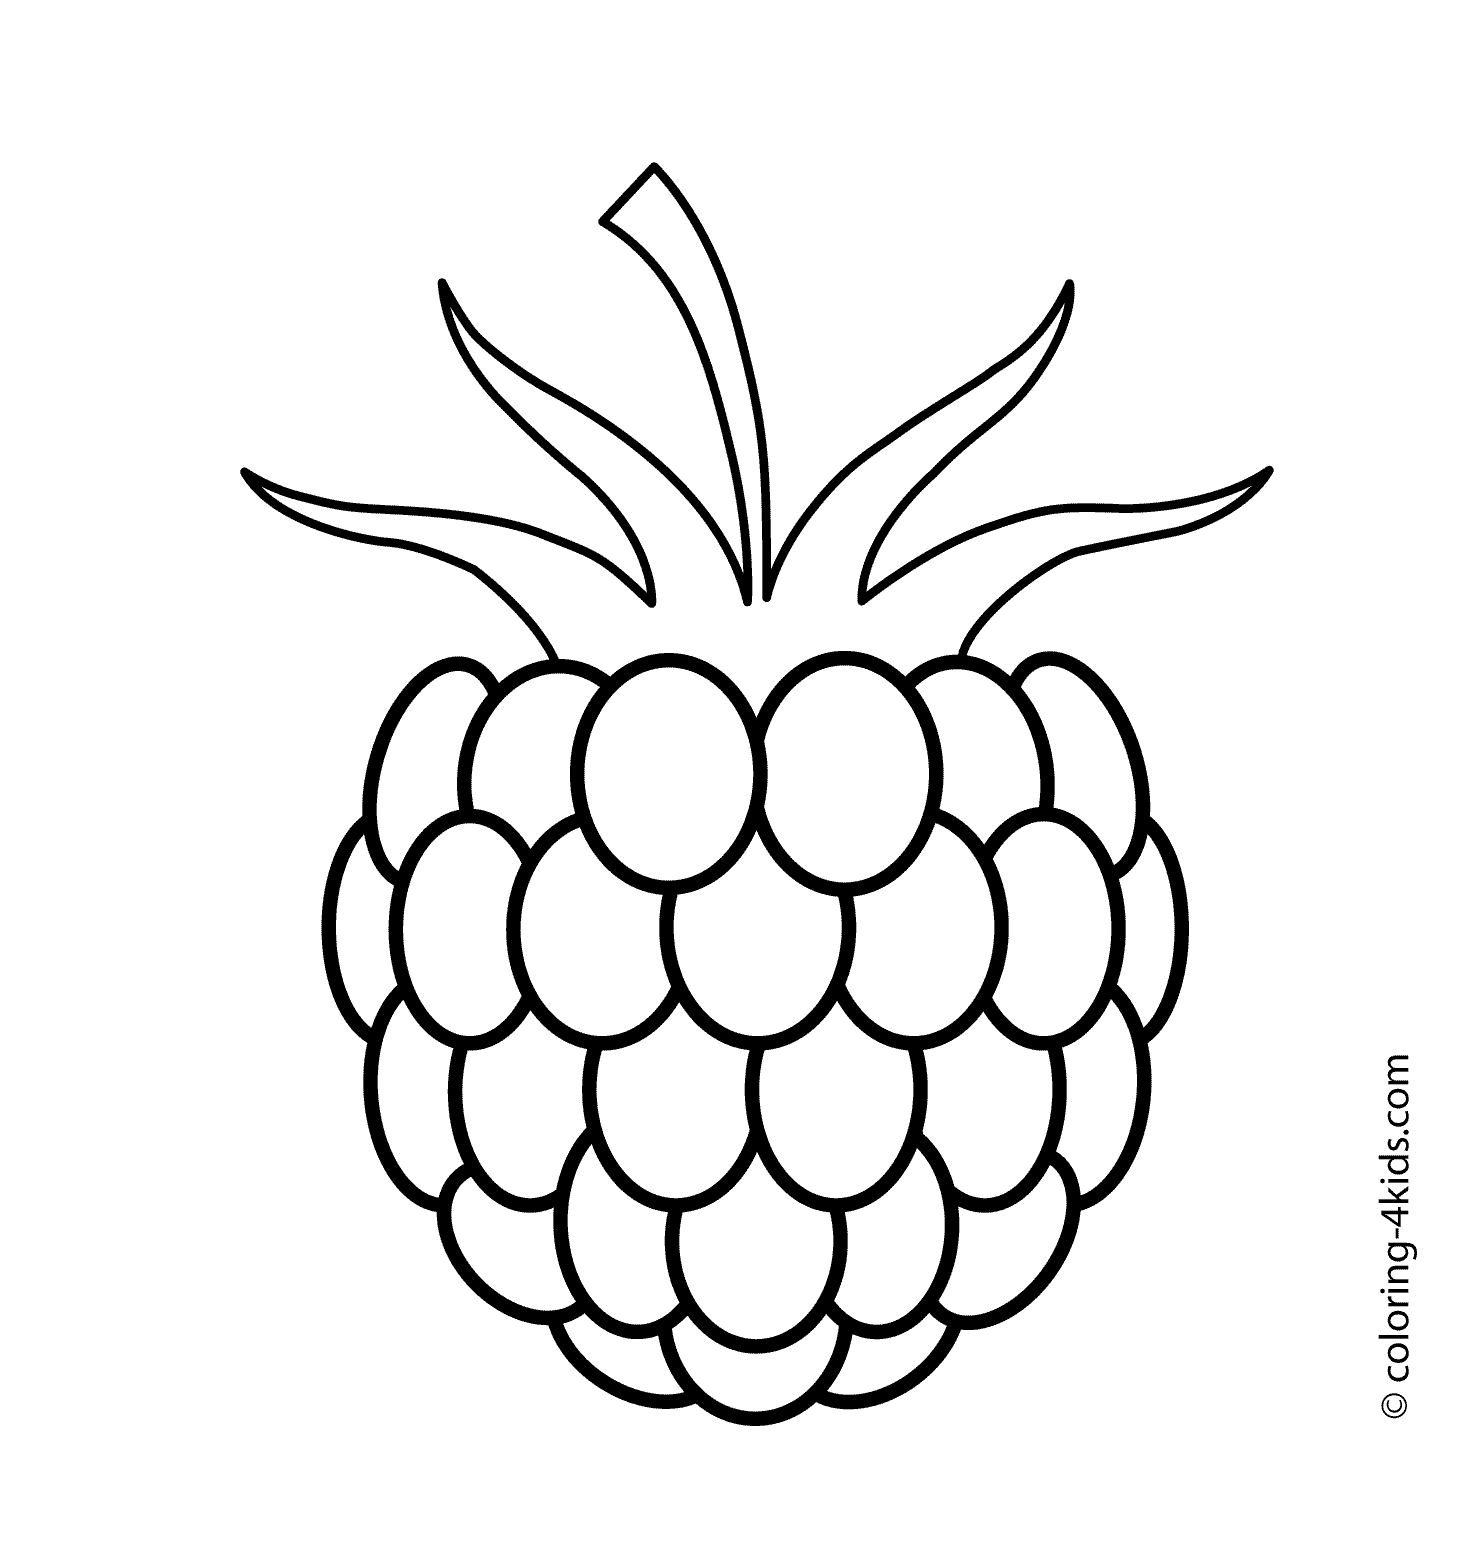 One raspberry fruits and berries coloring pages for kids, printable free |  Fruit coloring pages, Coloring pages, Coloring pages for kids